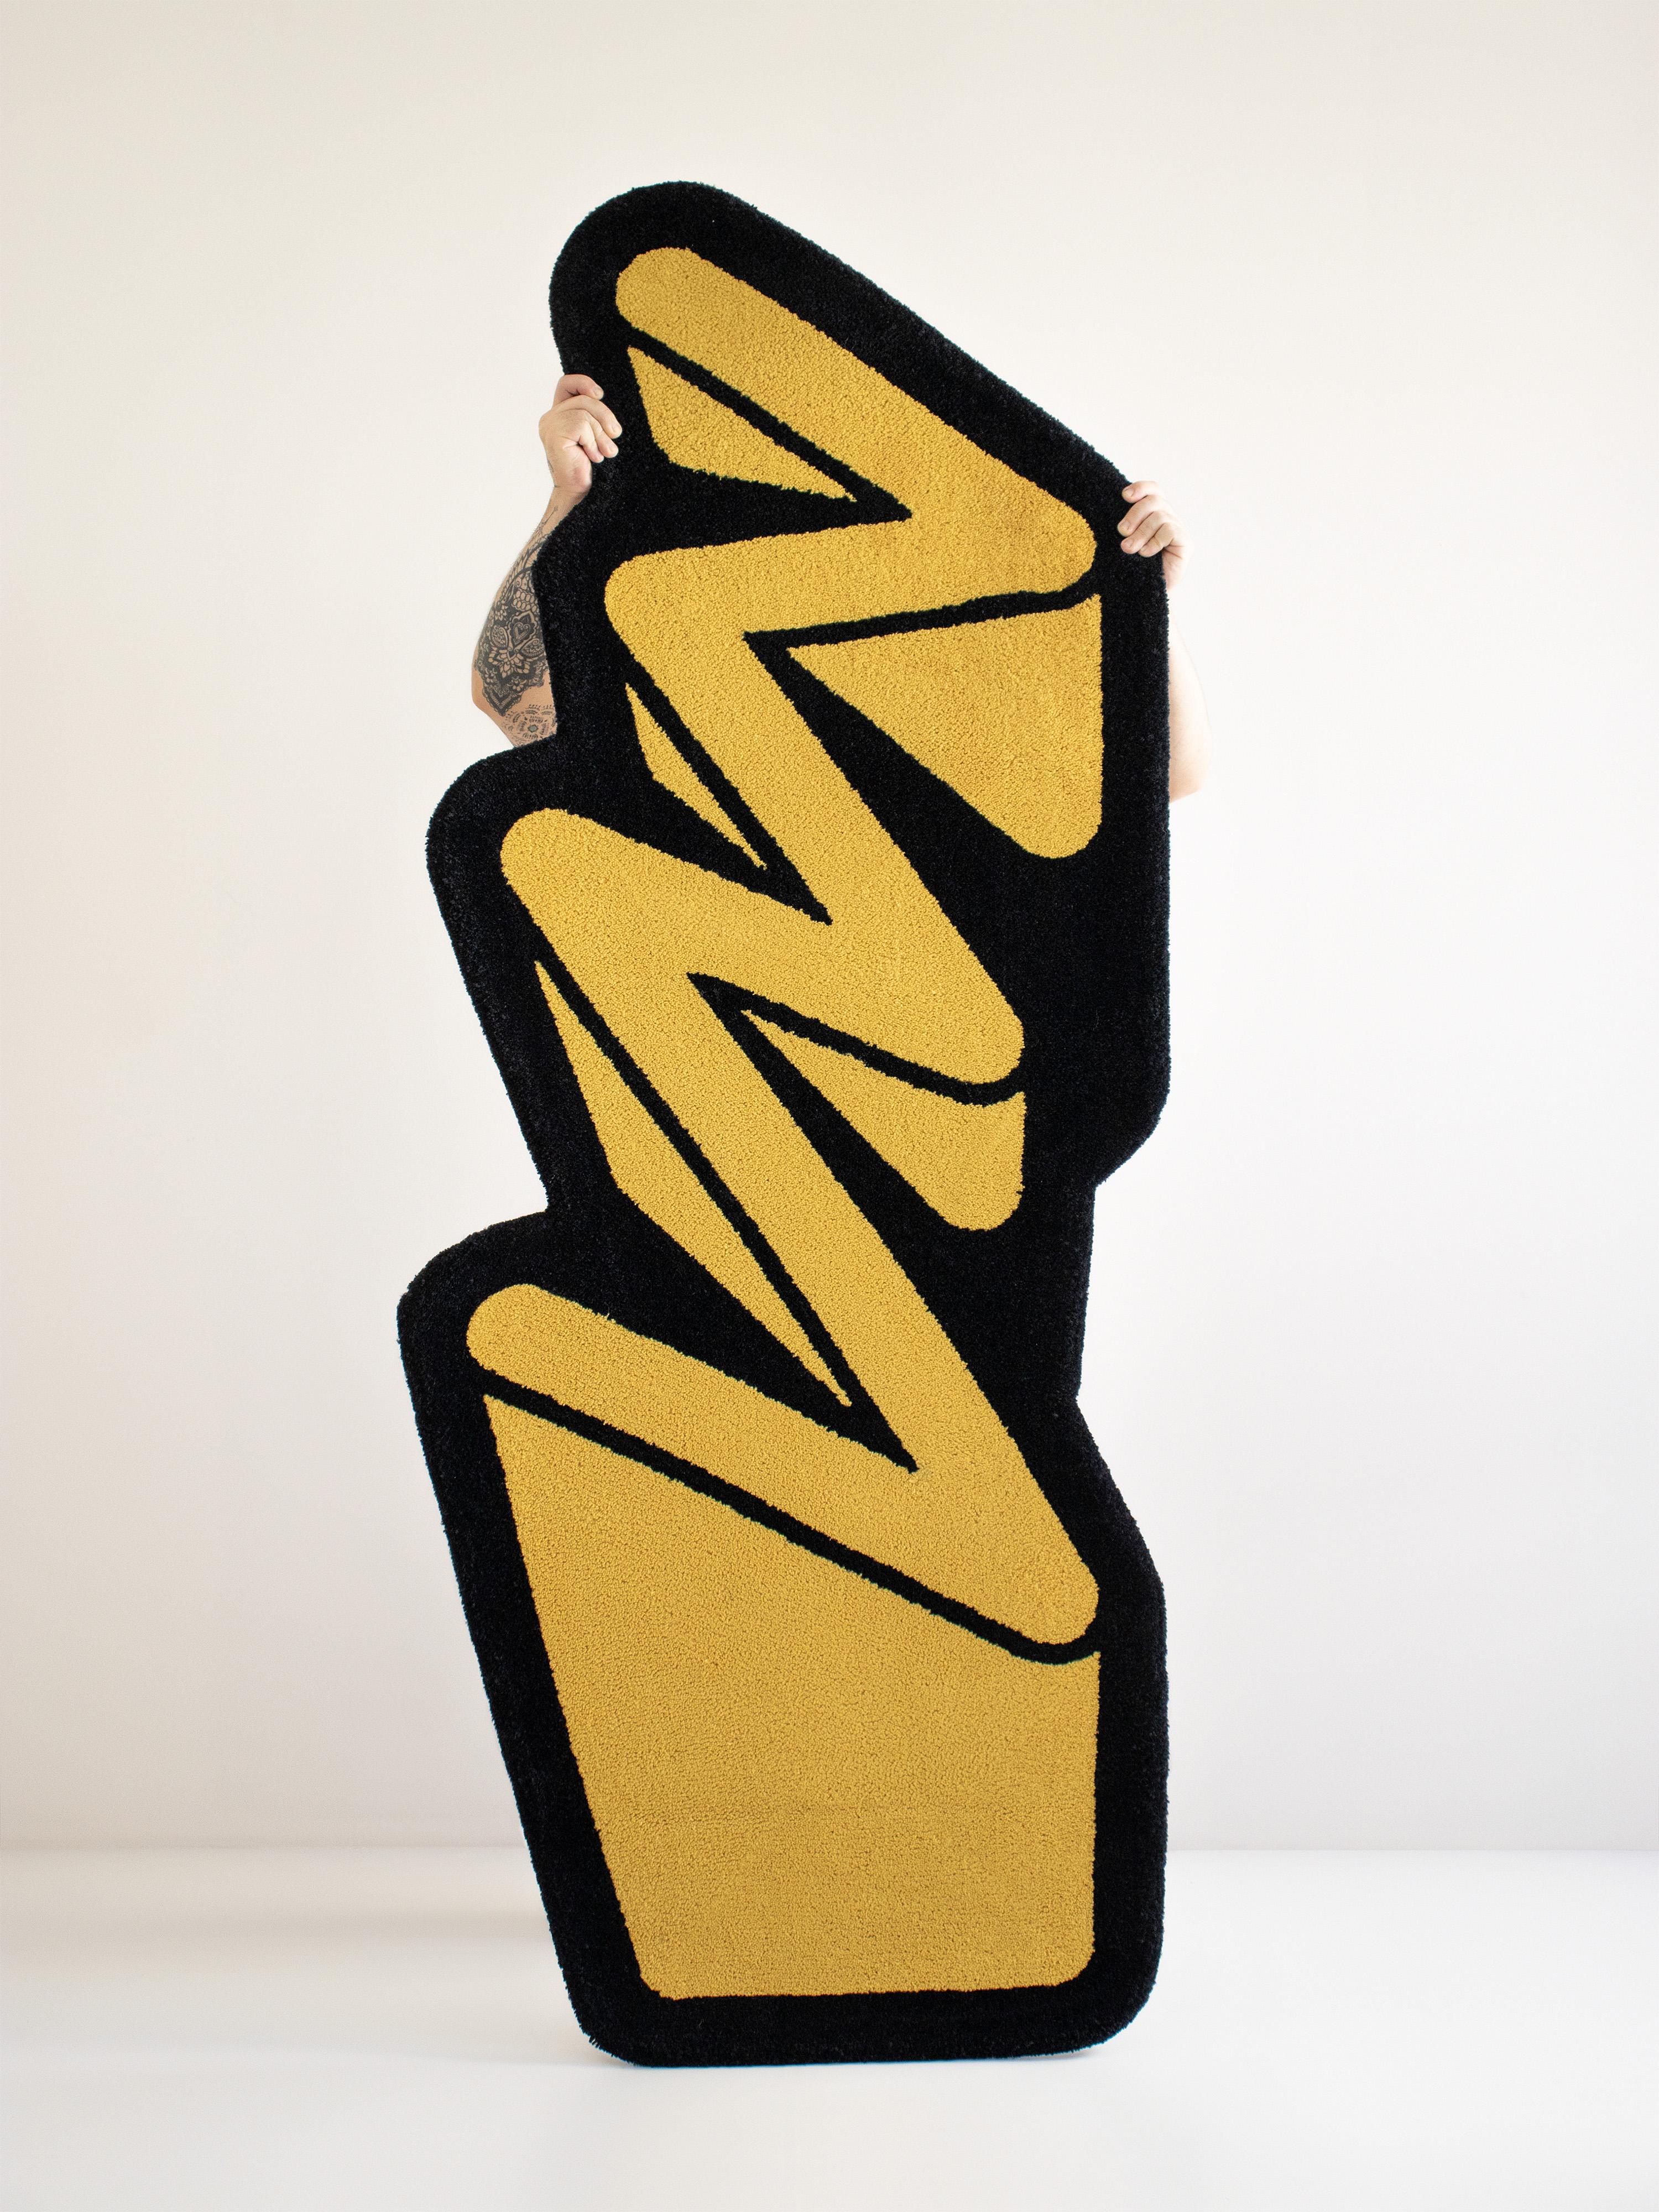 Modern Playful Yellow Zigzag Runner Rug from Graffiti Collection by Paulo Kobylka